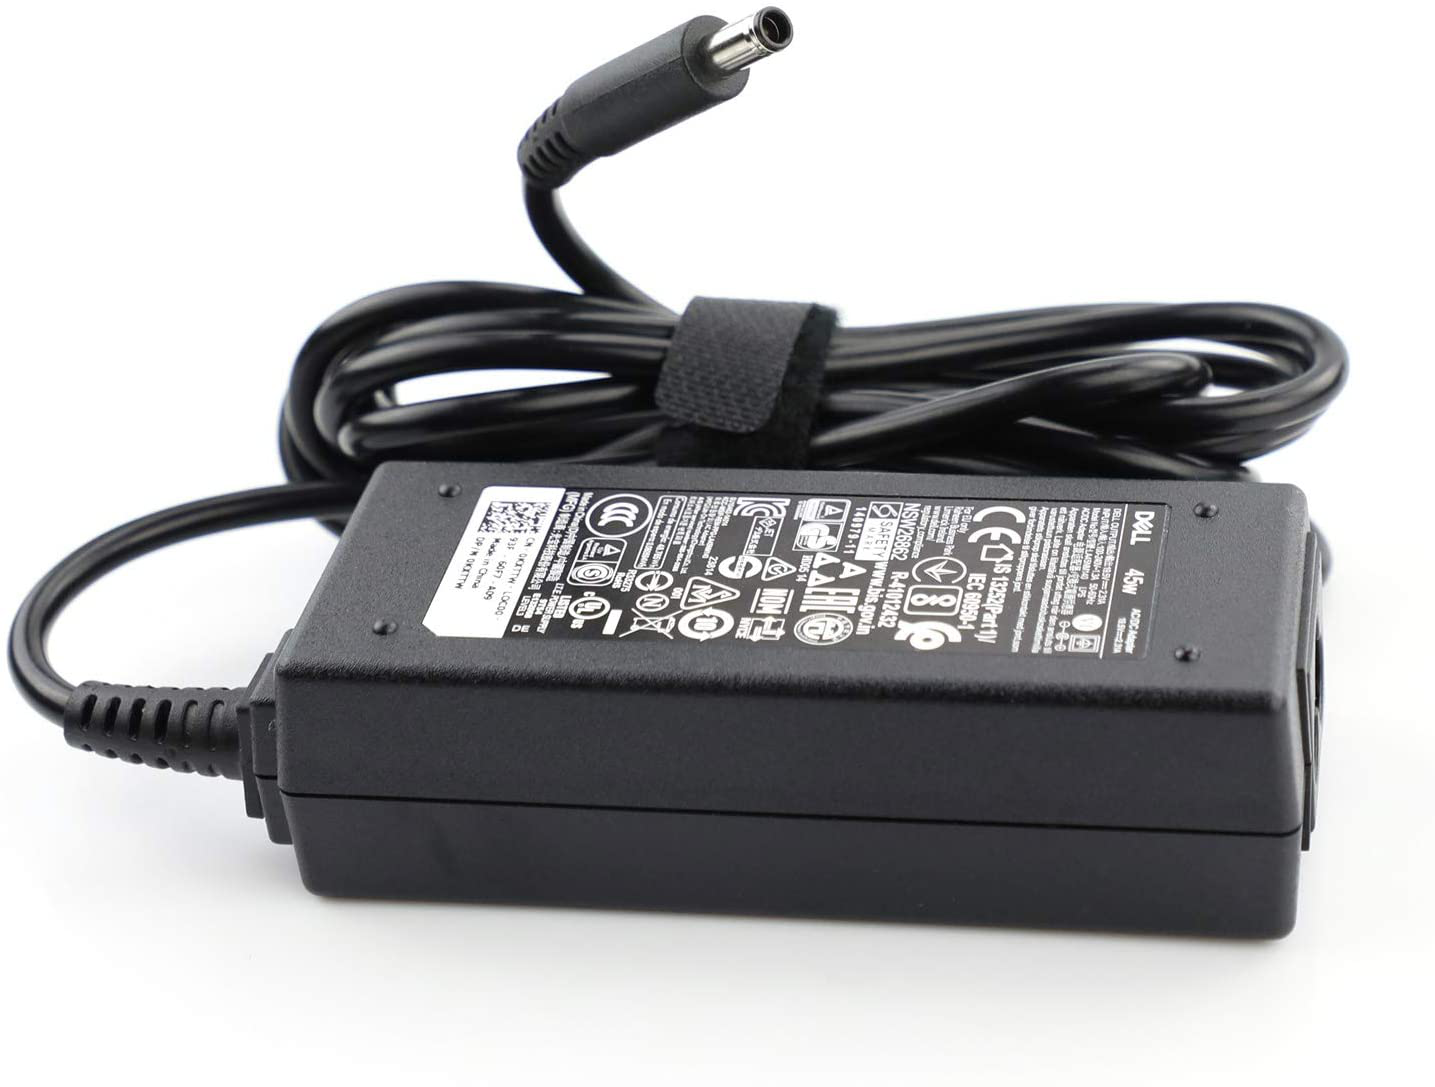 New Genuine Inspiron 11 13 14 15 Laptop Charger 45W(watt) Slim AC Power Adapter(LA45NM140/0KXTTW/0285K) for Dell Inspiron 3000 5000 7000 Series Charger ���